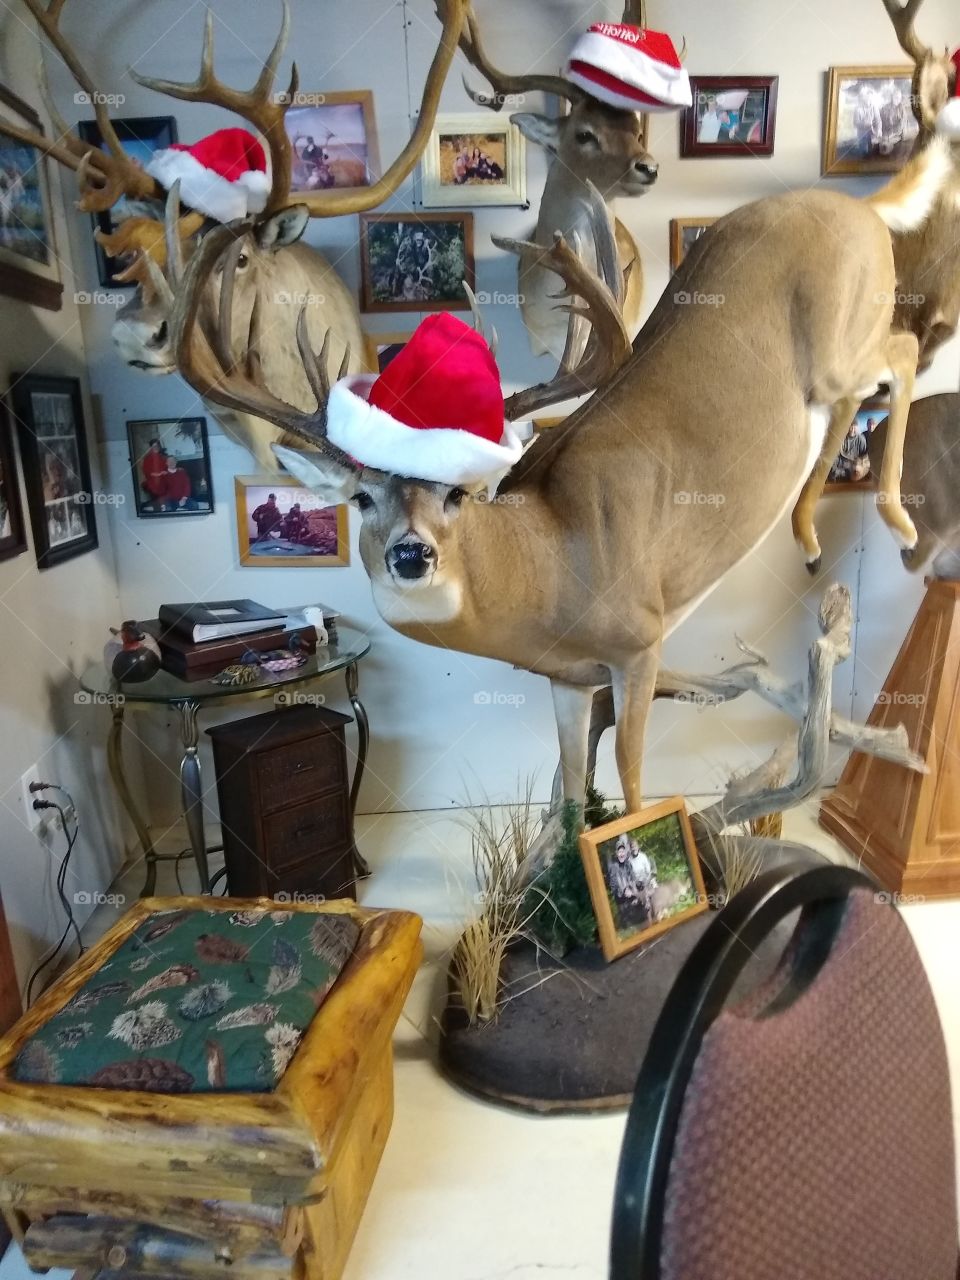 211" Whitetail deer mount with Christmas hat Picture taken with Motorola G6 phone